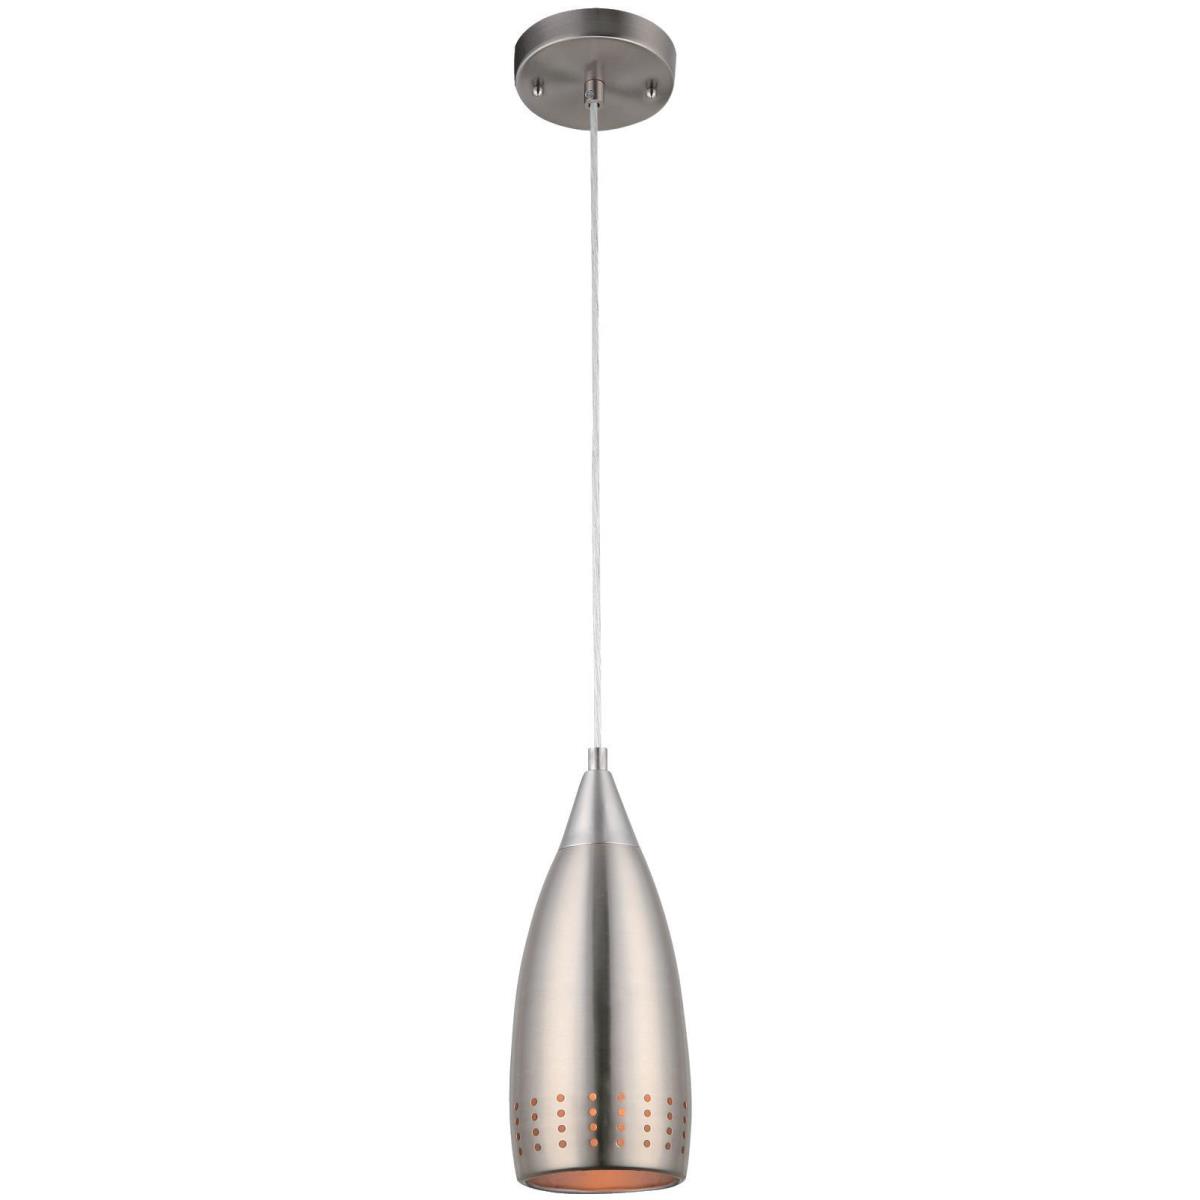 1 Light Mini Pendant Brushed Nickel Finish with Perforated Metal Shade